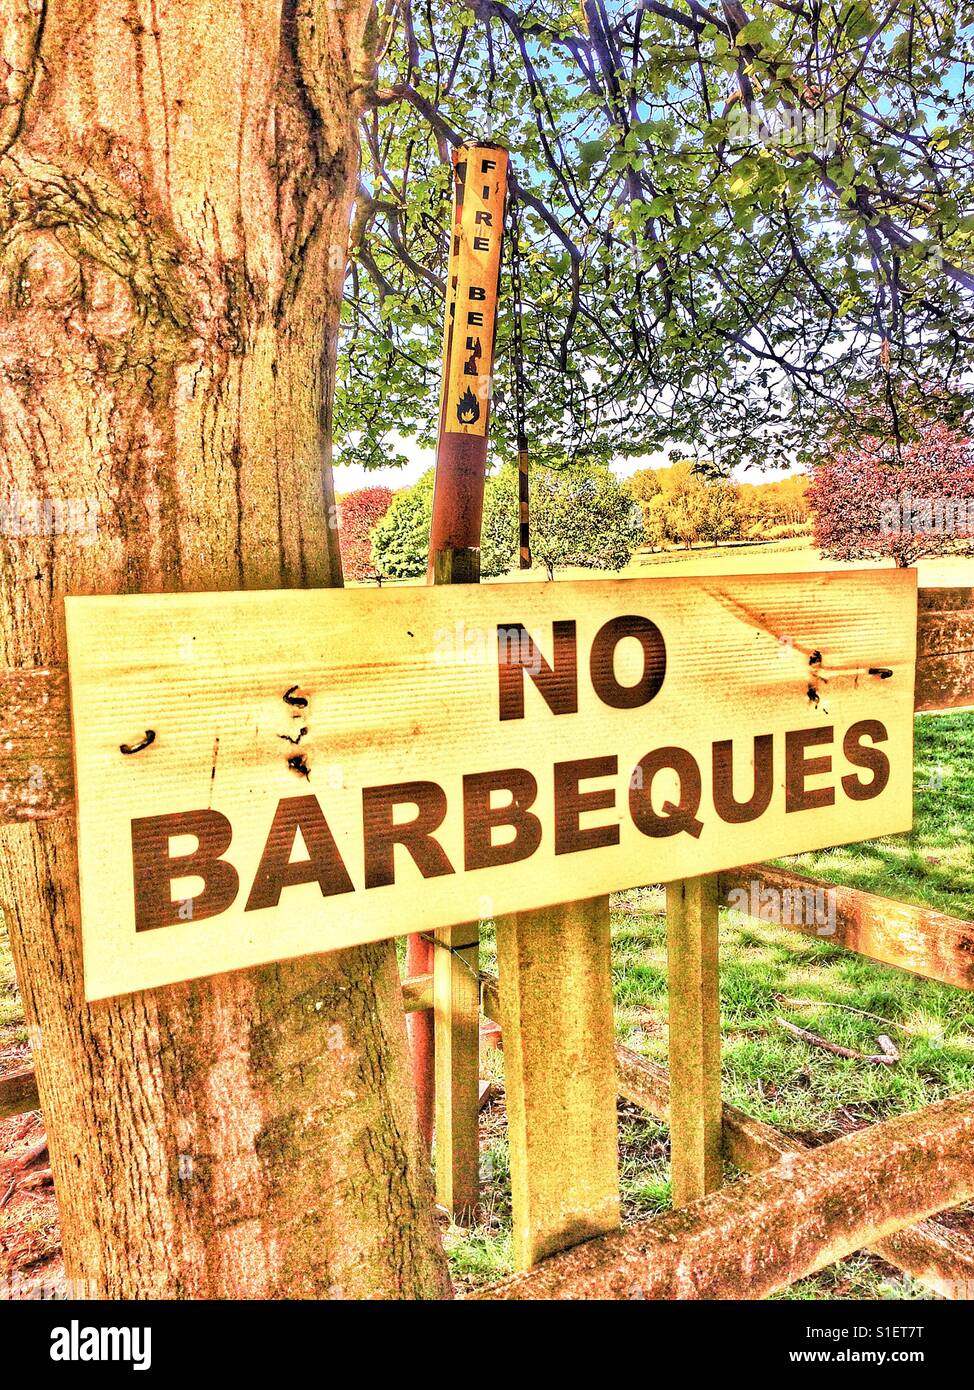 No barbecues sign and fire bell Stock Photo